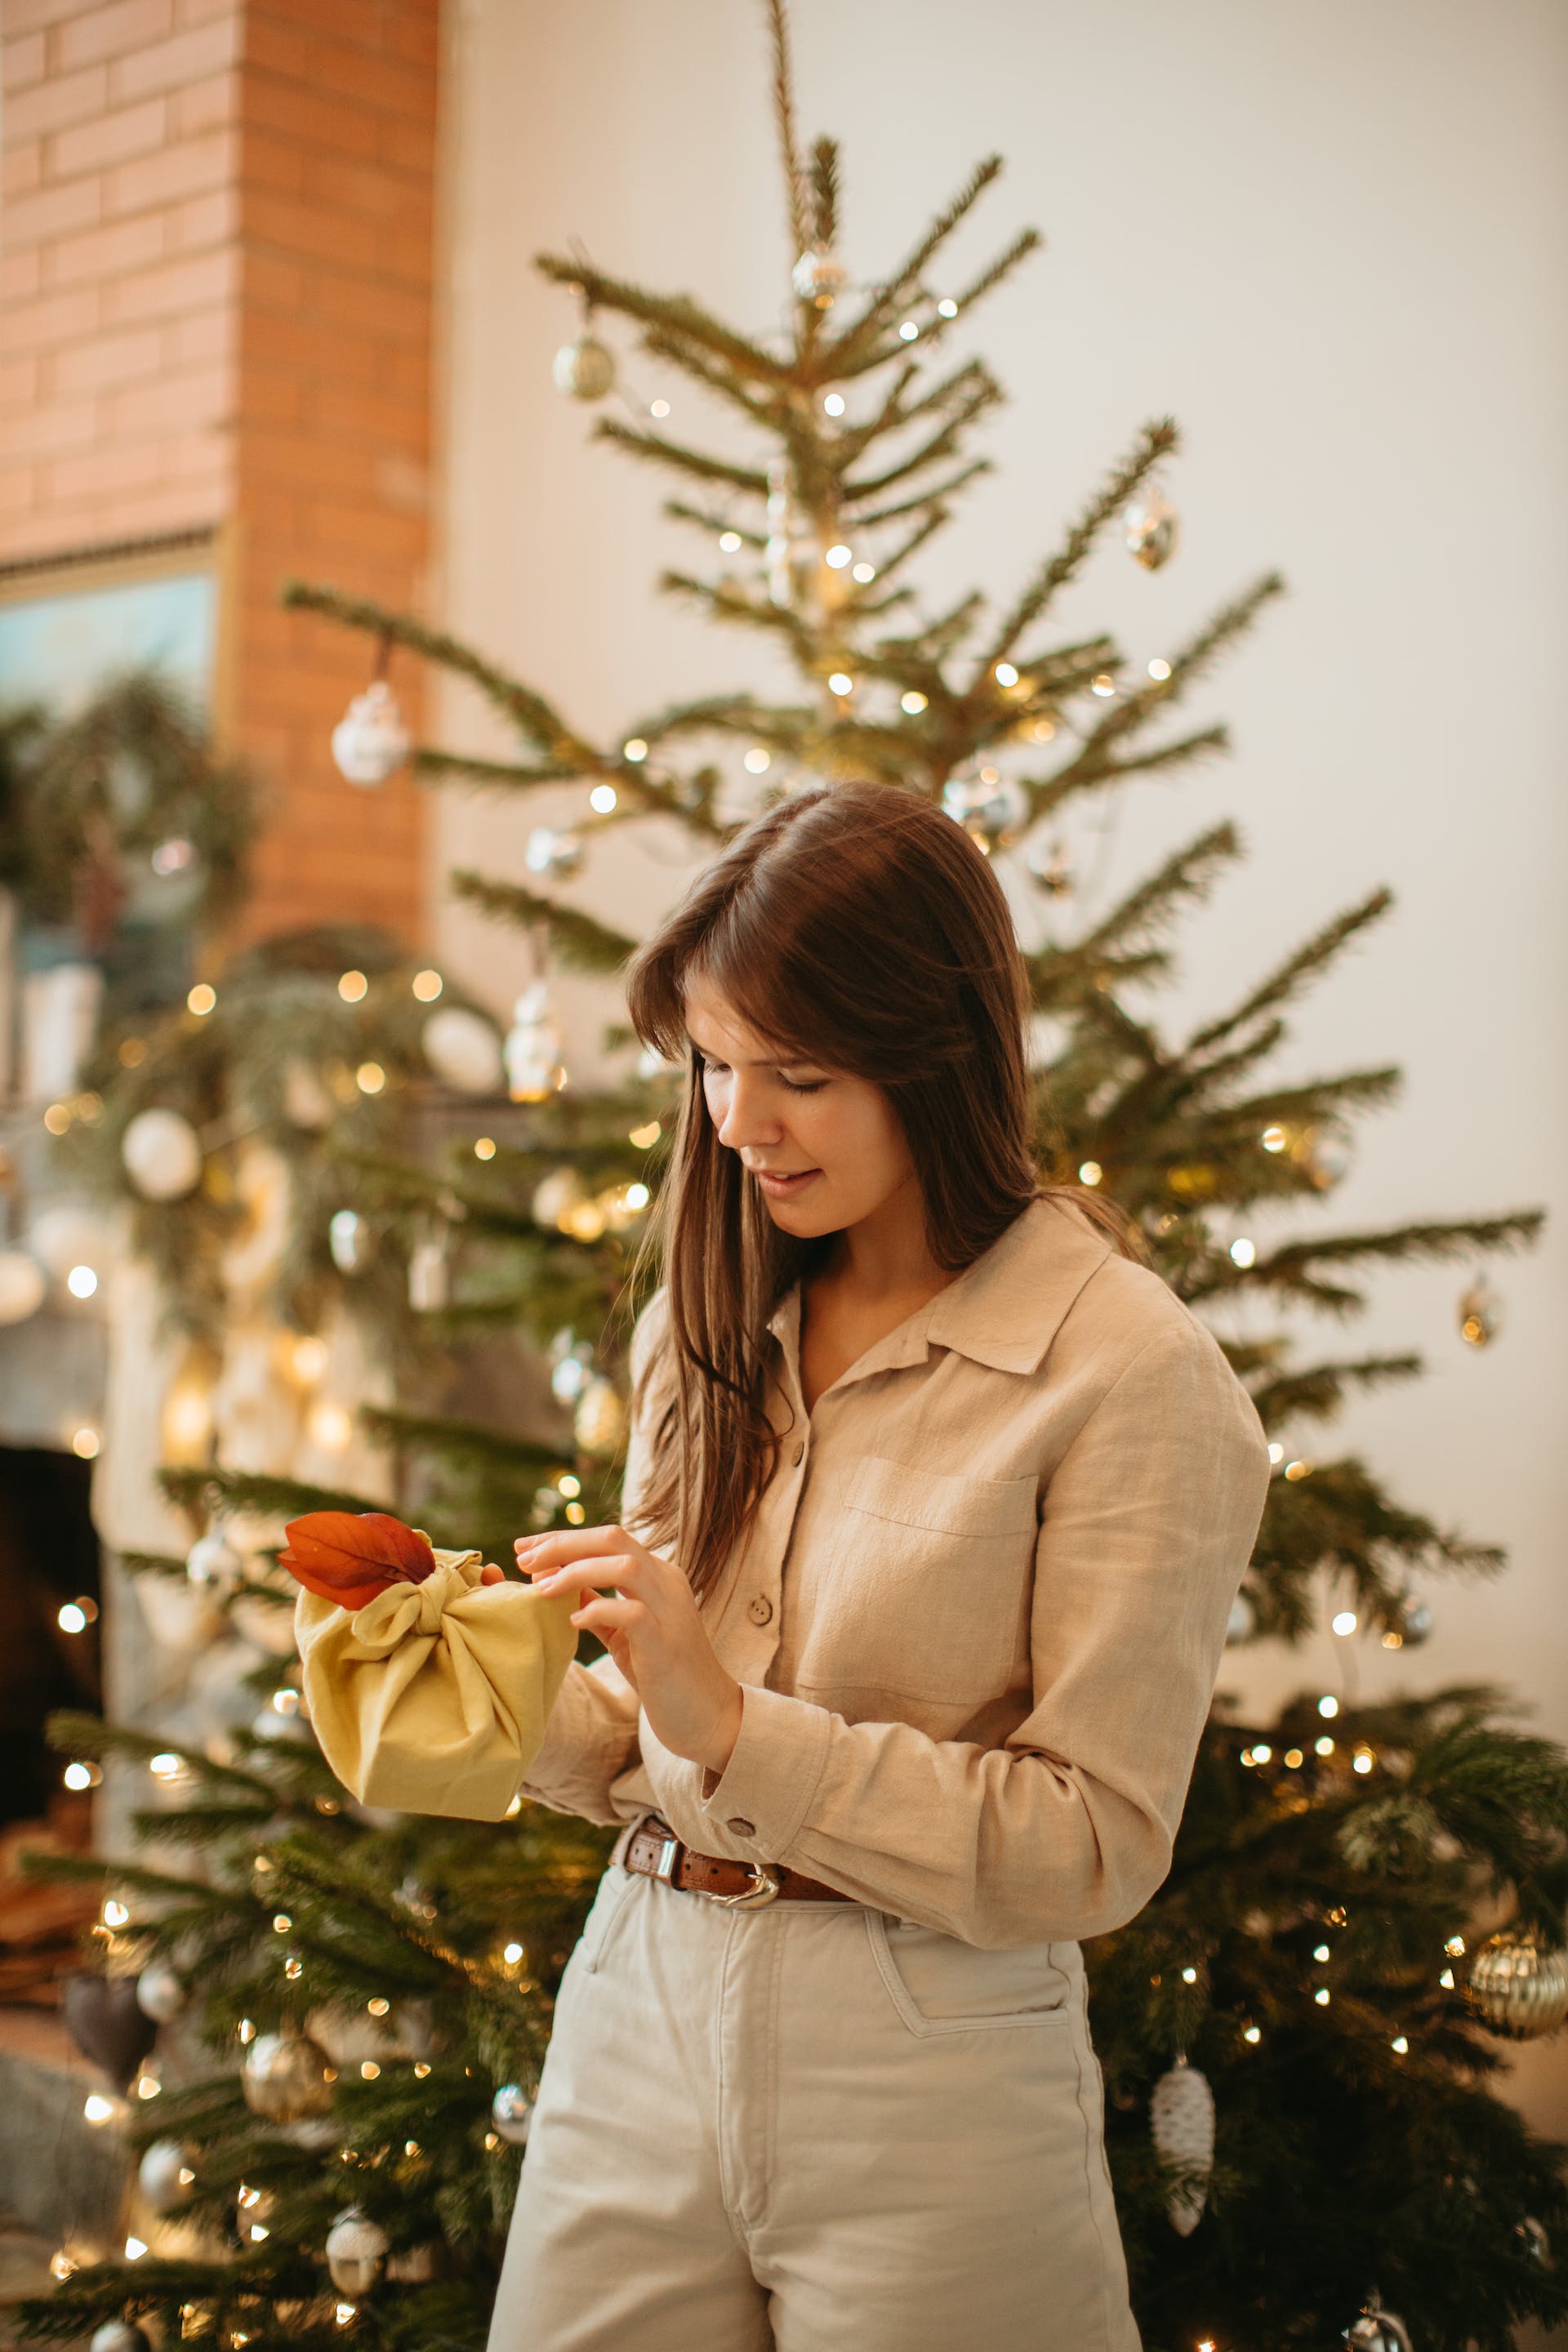 A woman holding a gift box while standing near a Christmas tree | Source: Pexels